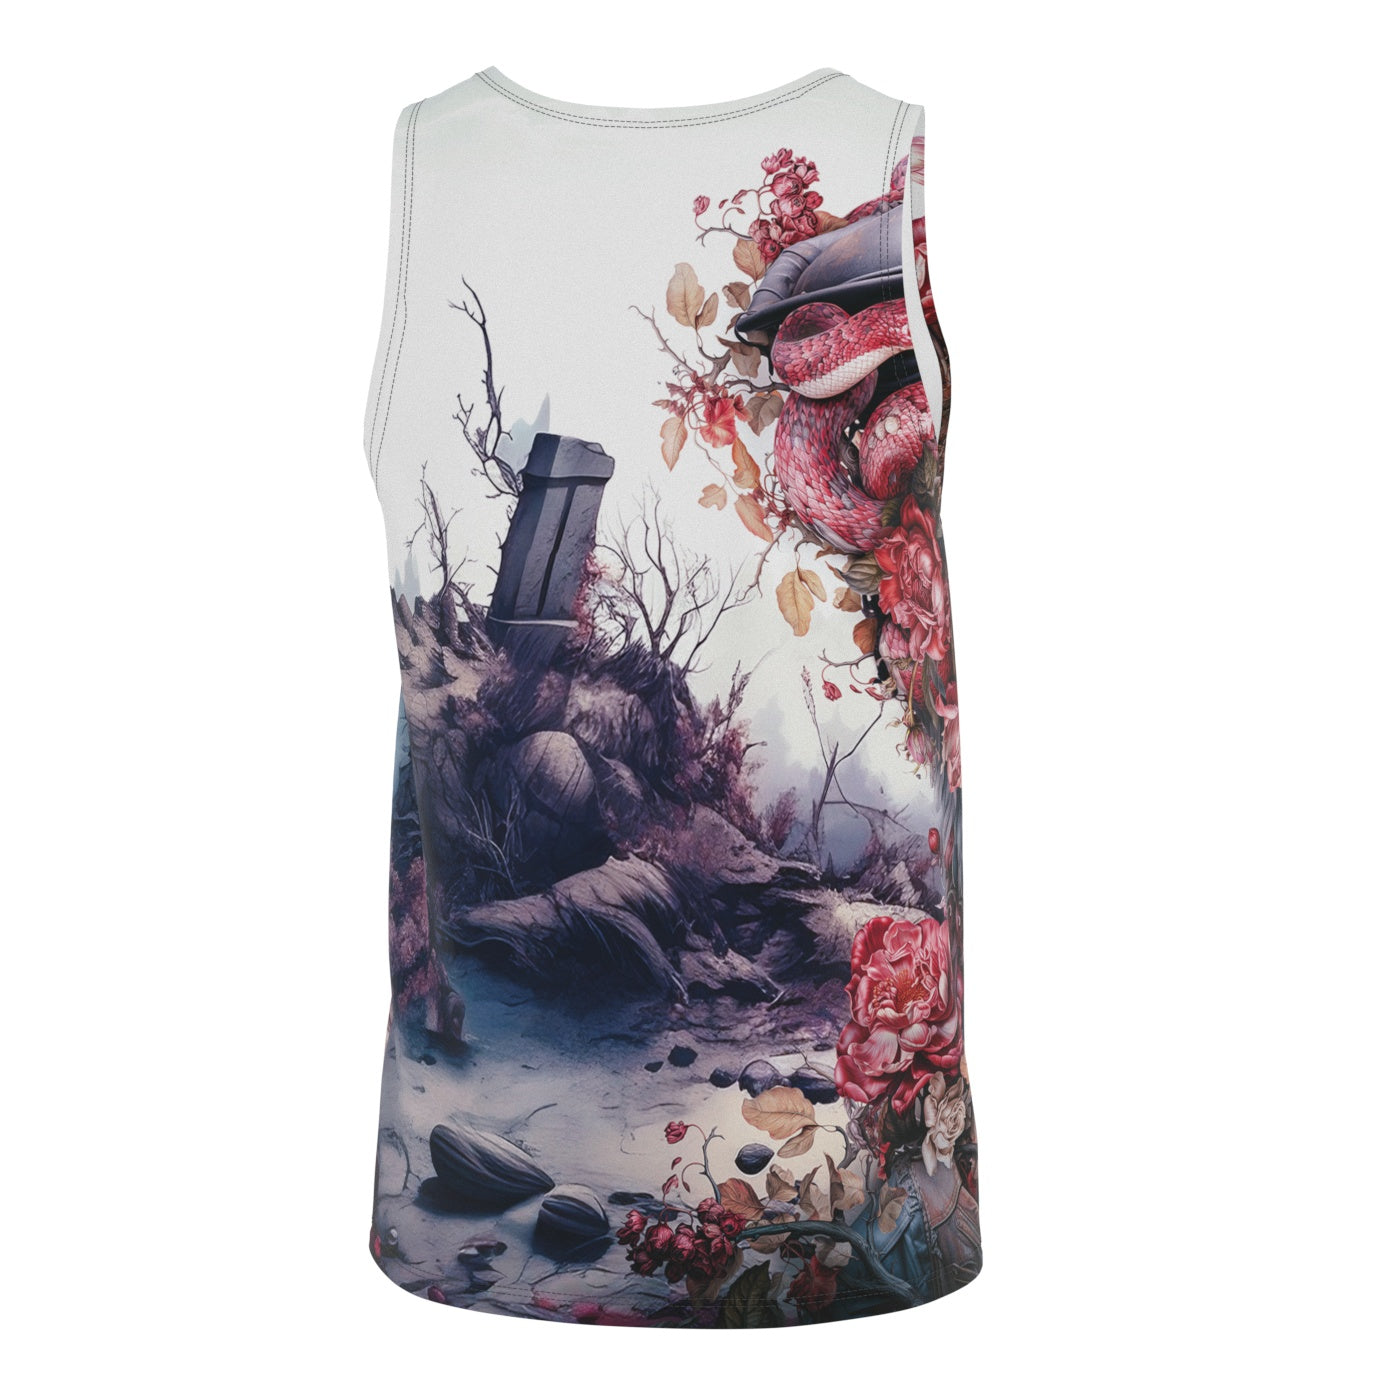 A Surreal Farewell Tank Top